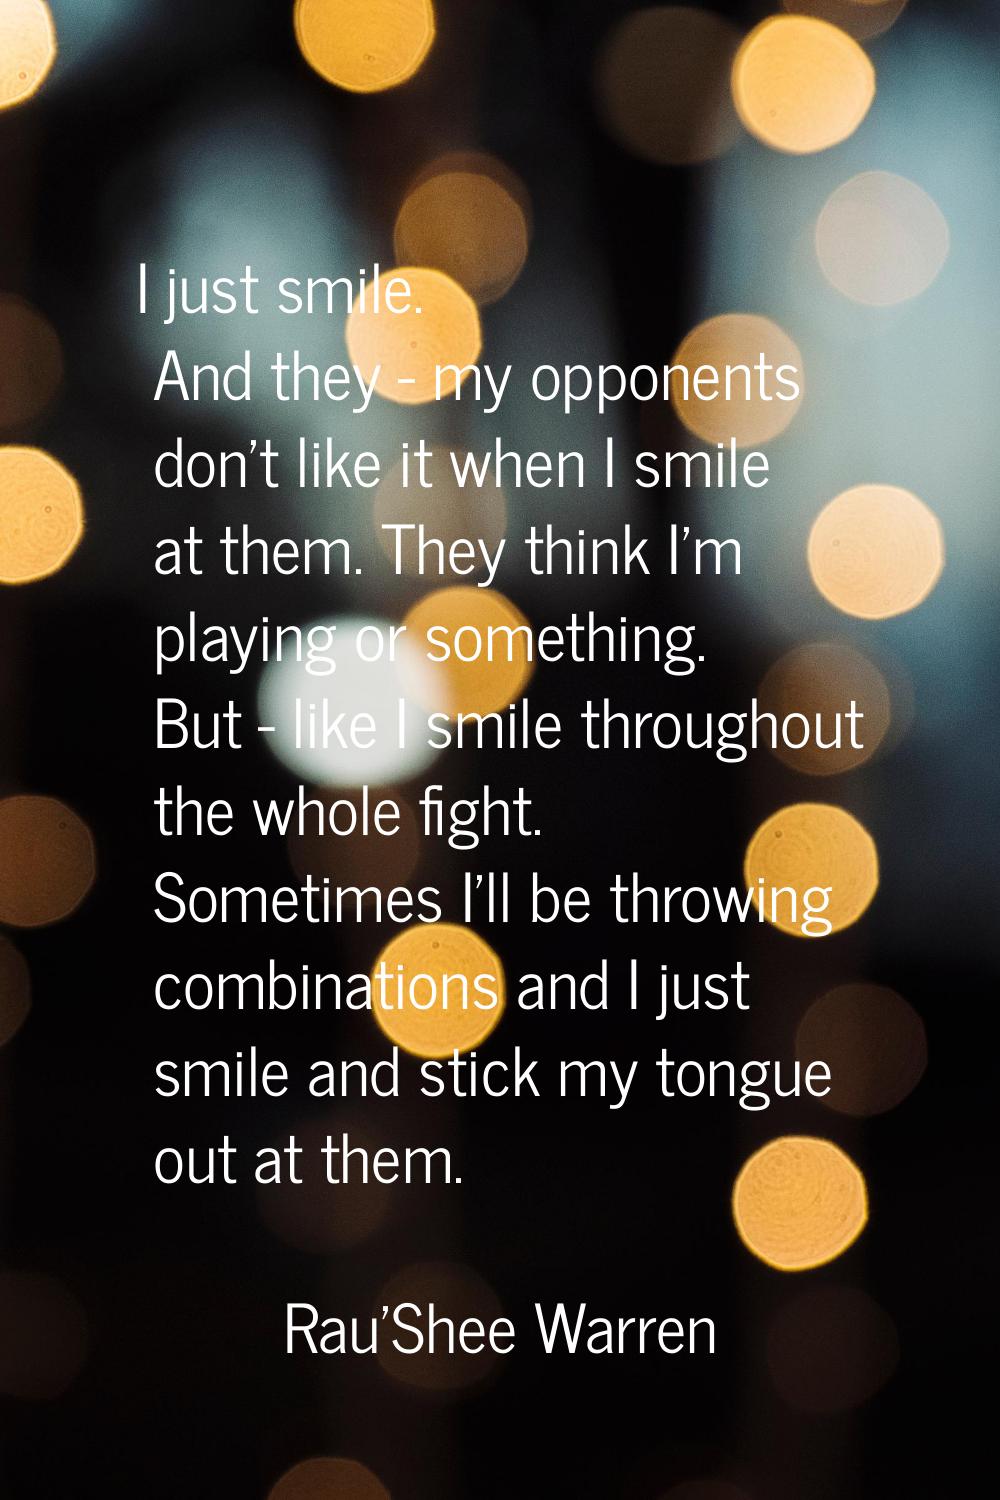 I just smile. And they - my opponents don't like it when I smile at them. They think I'm playing or